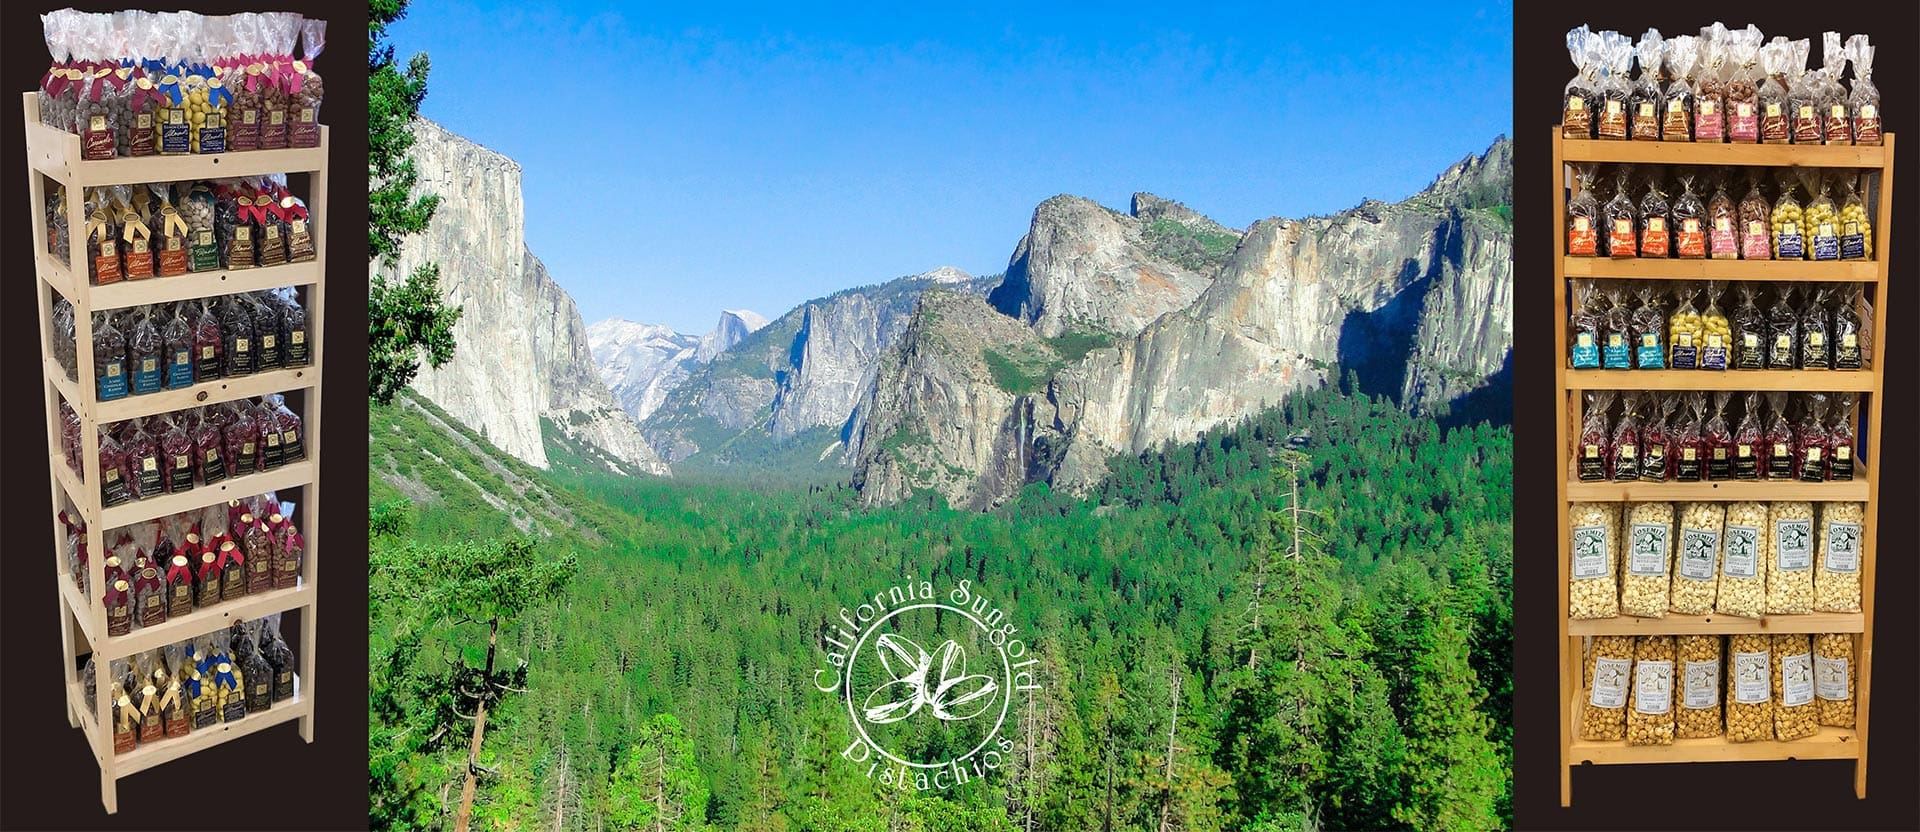 A collage featuring two images of shelves with assorted jams and spices flanking a central panoramic view of yosemite valley, including half dome under clear blue skies.